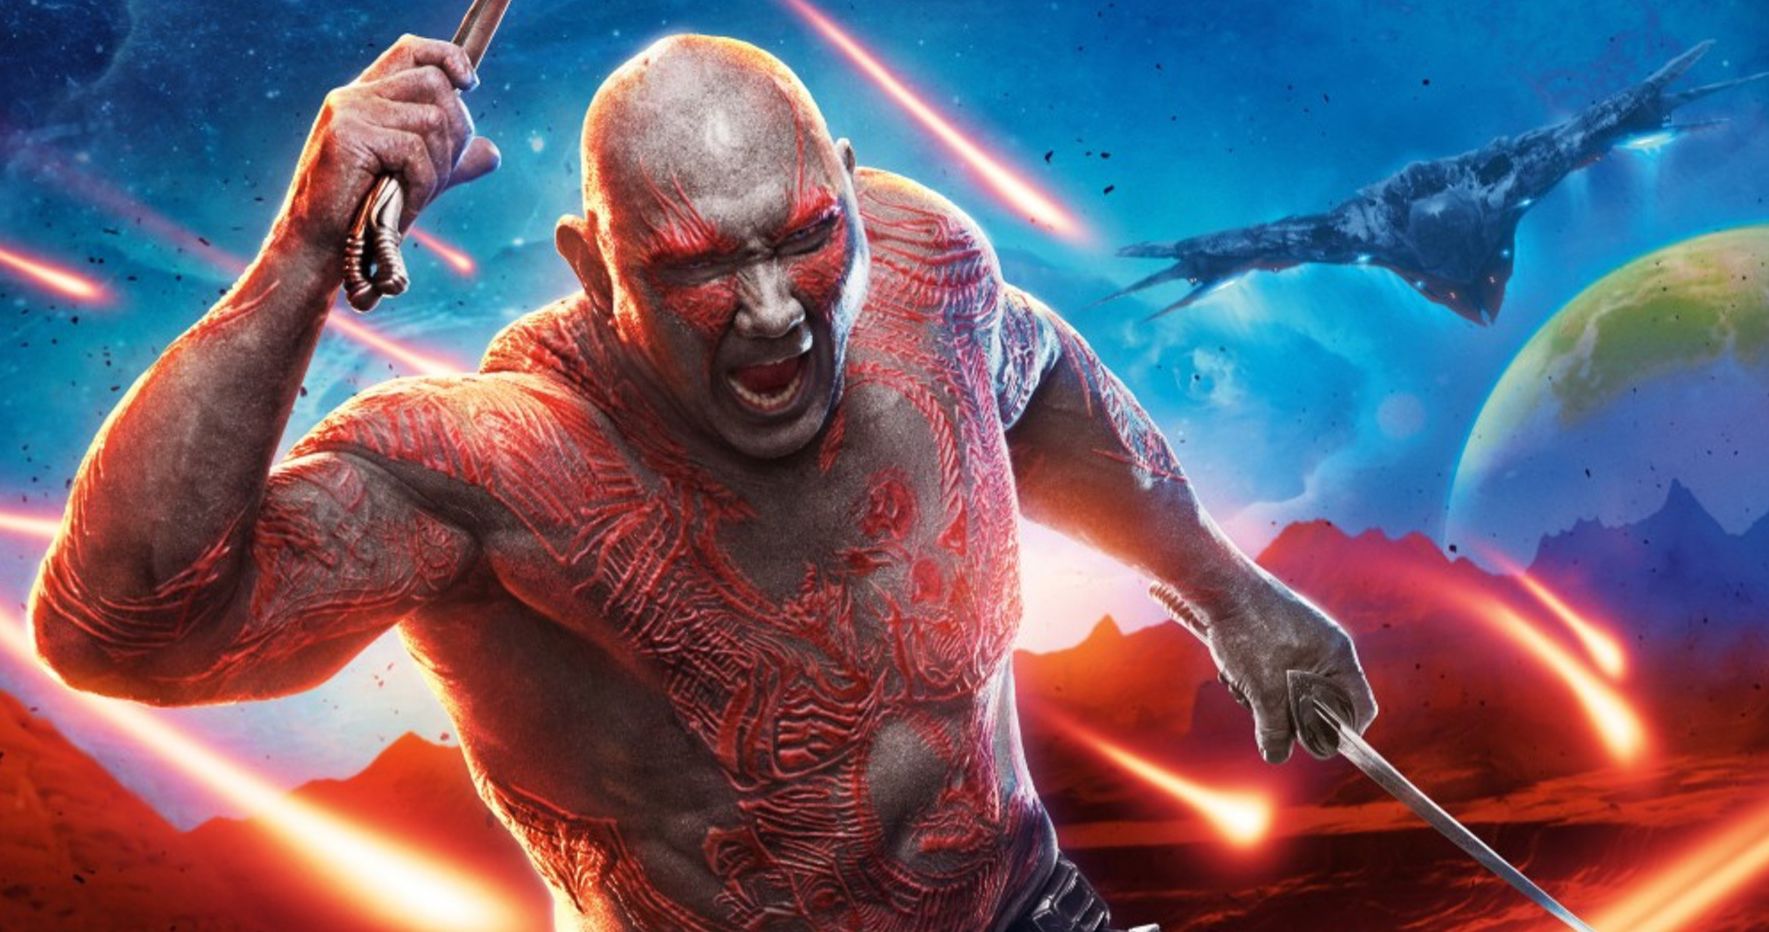 Dave Bautista Was Broke Before Landing Drax in Guardians of the Galaxy